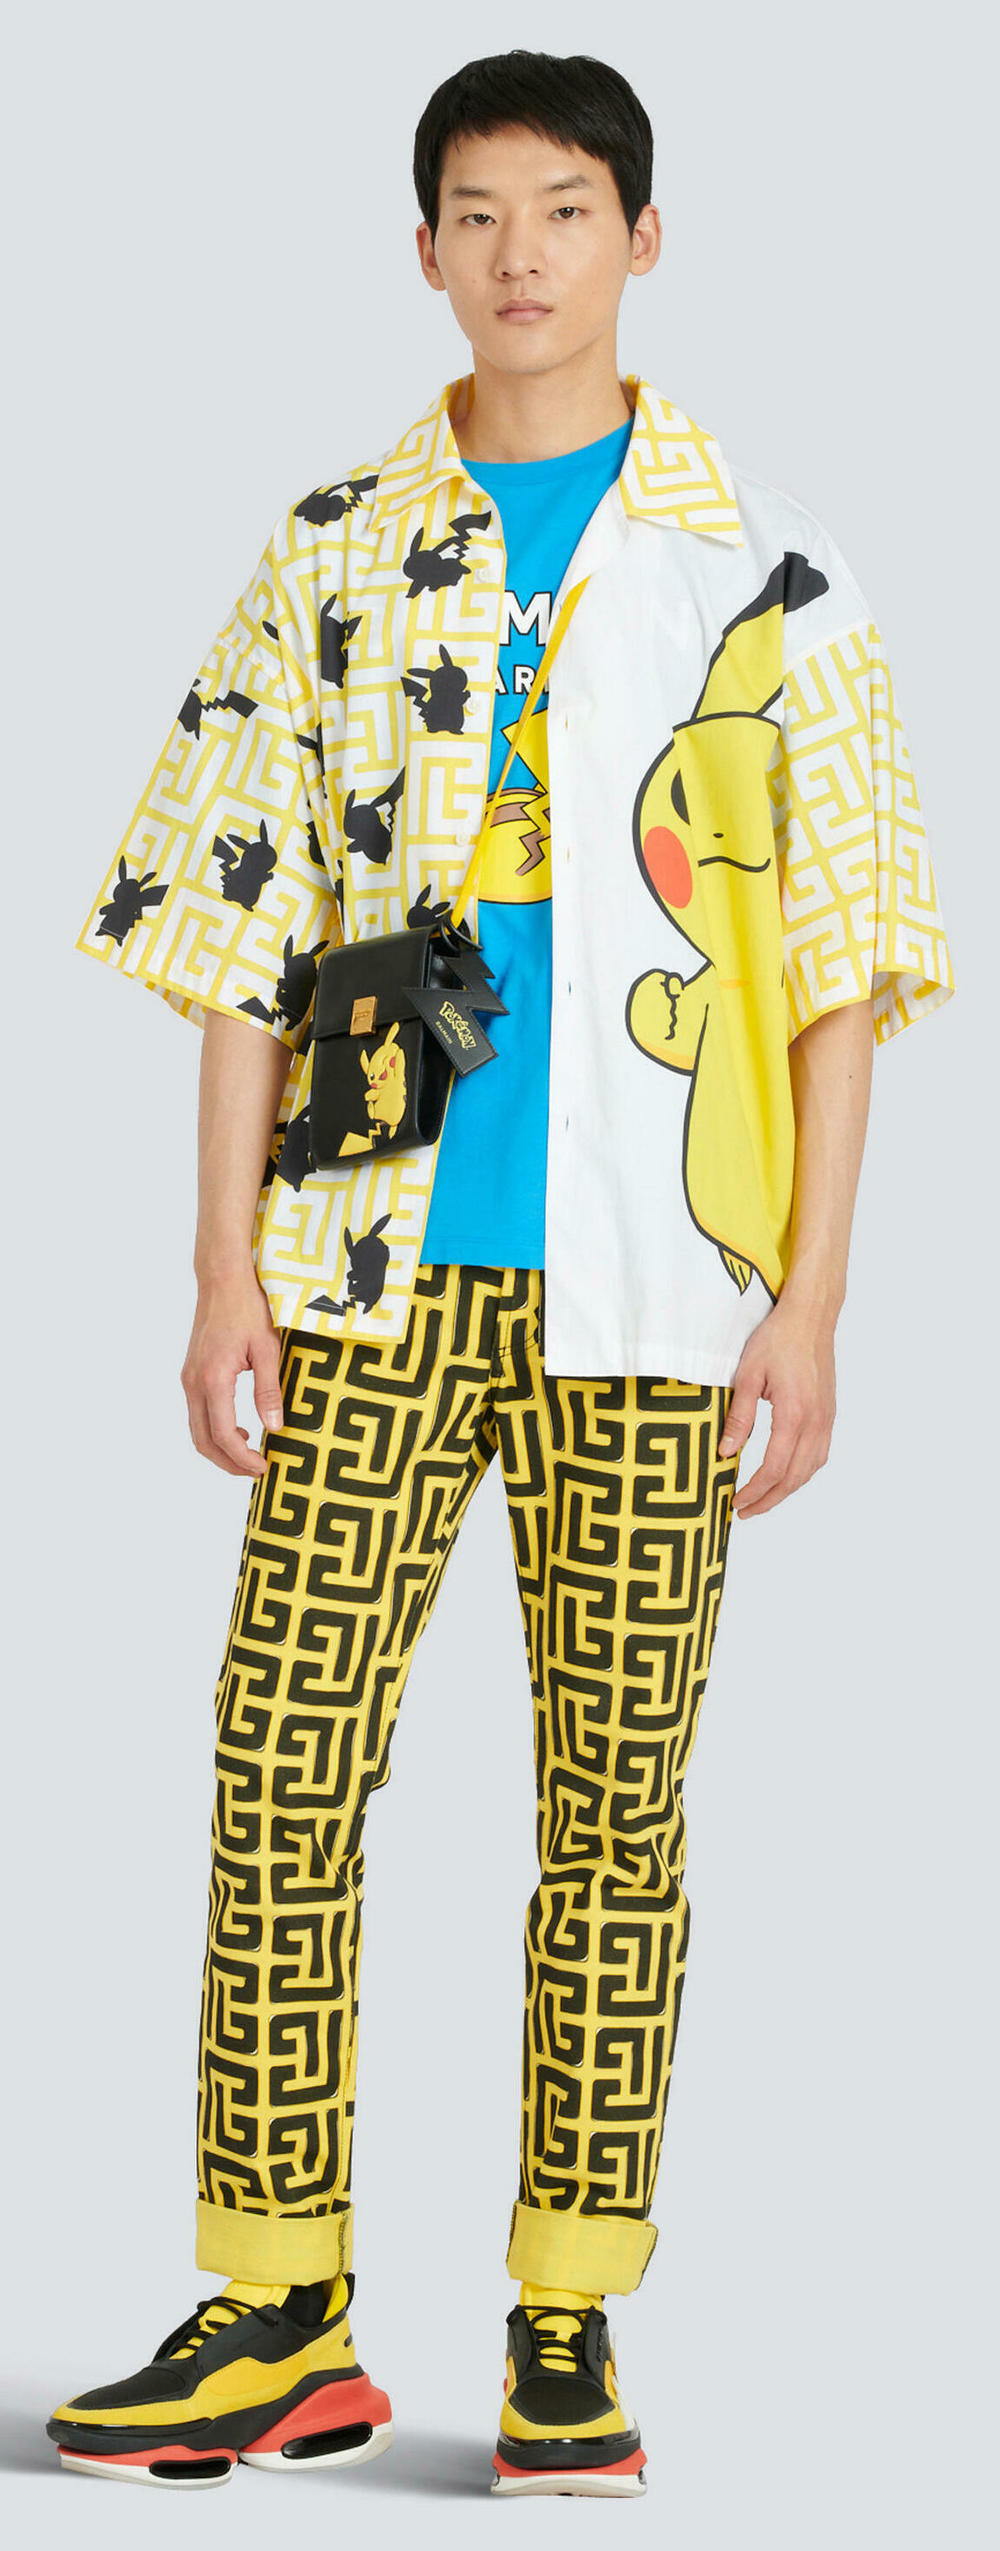 Each article of clothing in this collaboration between Balmain and Pokémon goes for hundreds of dollars, and highlights the loud designs prized in the streetwear scene.